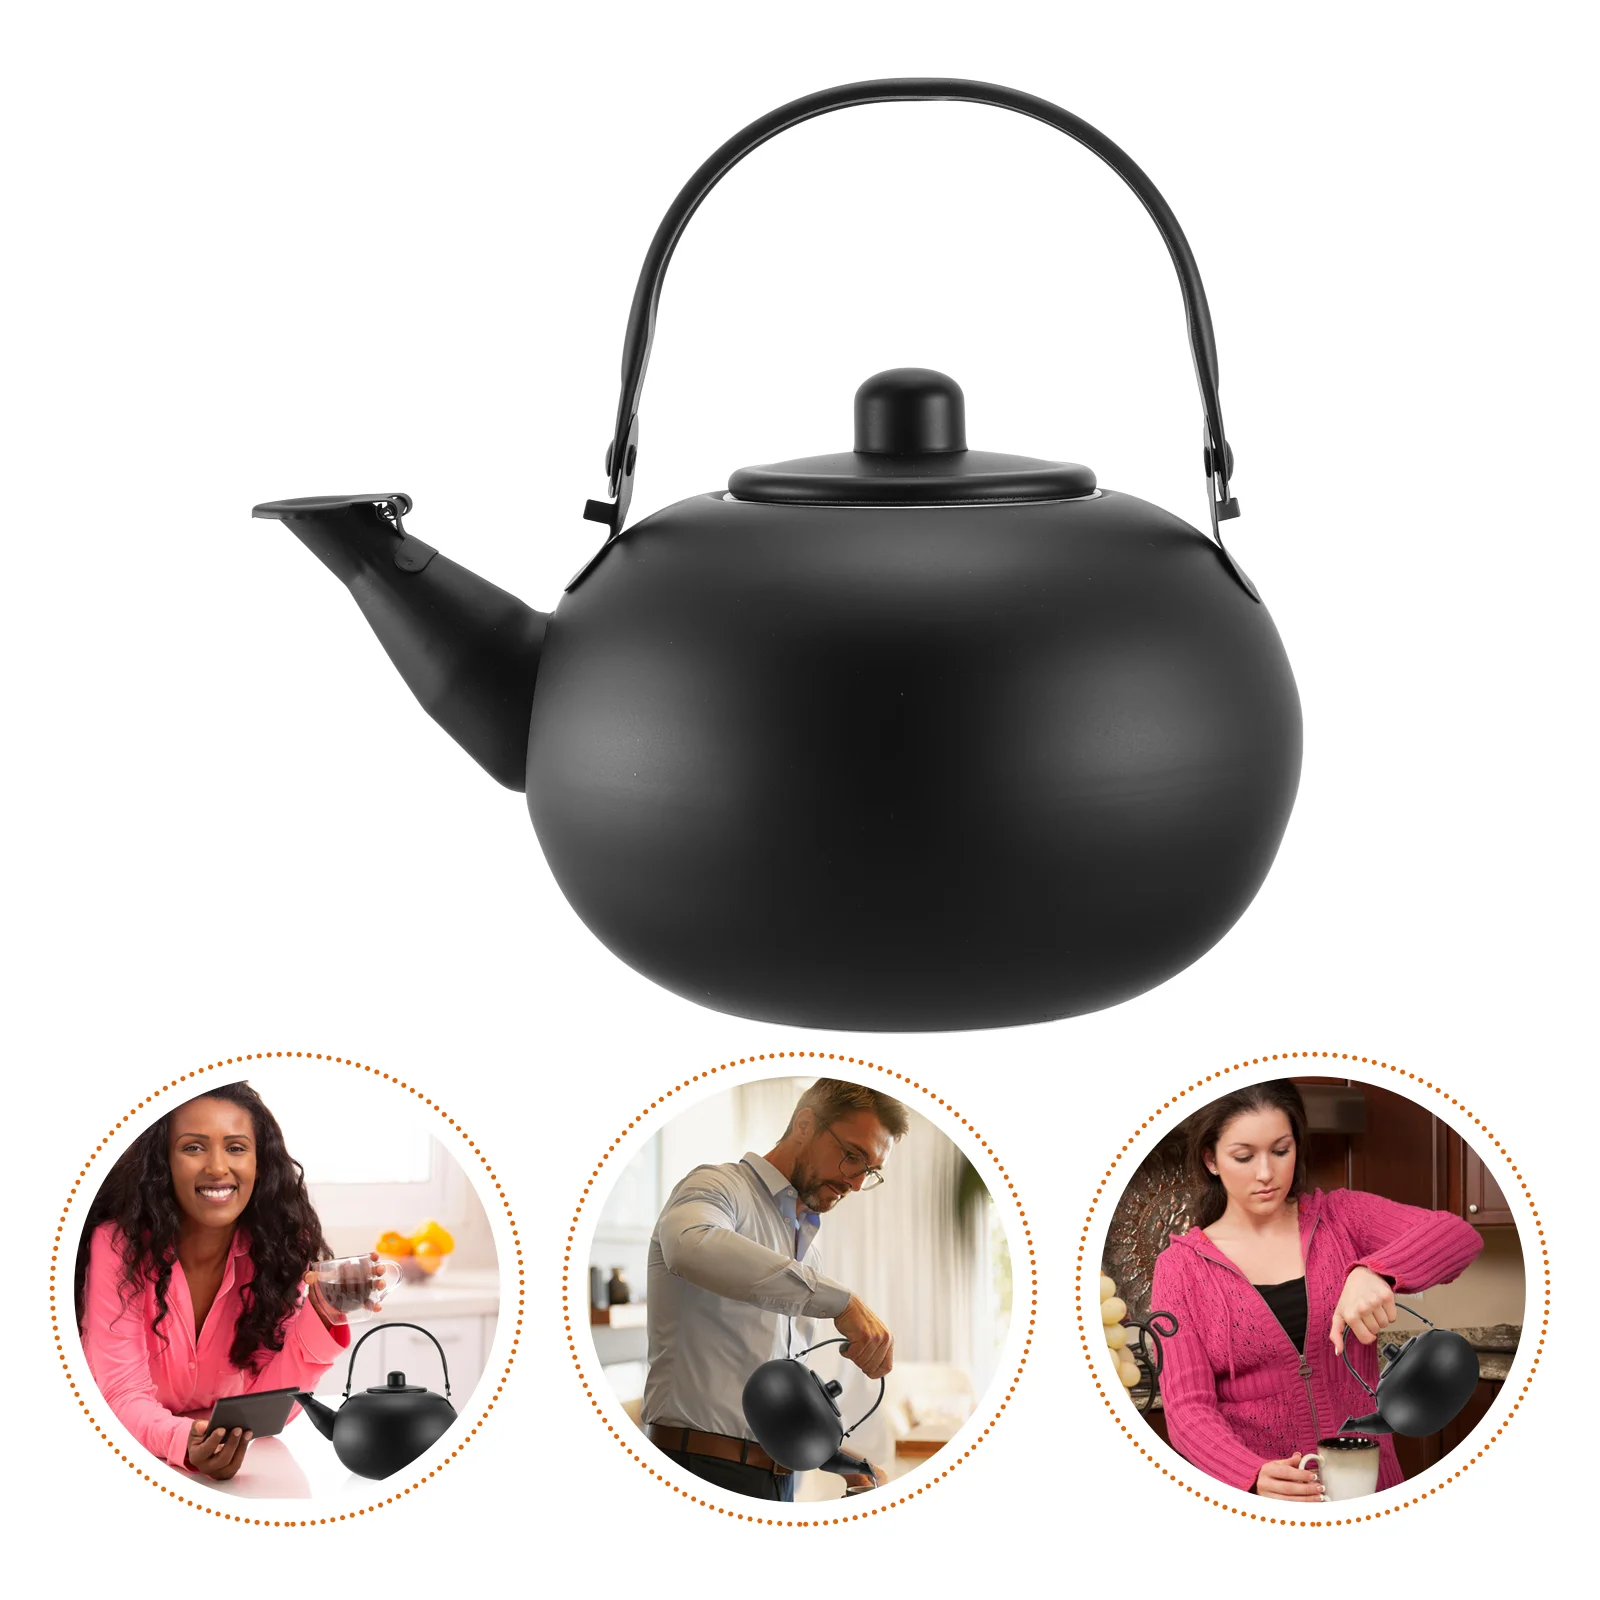 

Kettle Tea Teapot Stainless Pot Water Steel Whistling Stovetop Stove Infuser Boiling Metal Coffee Induction Gas Teakettle